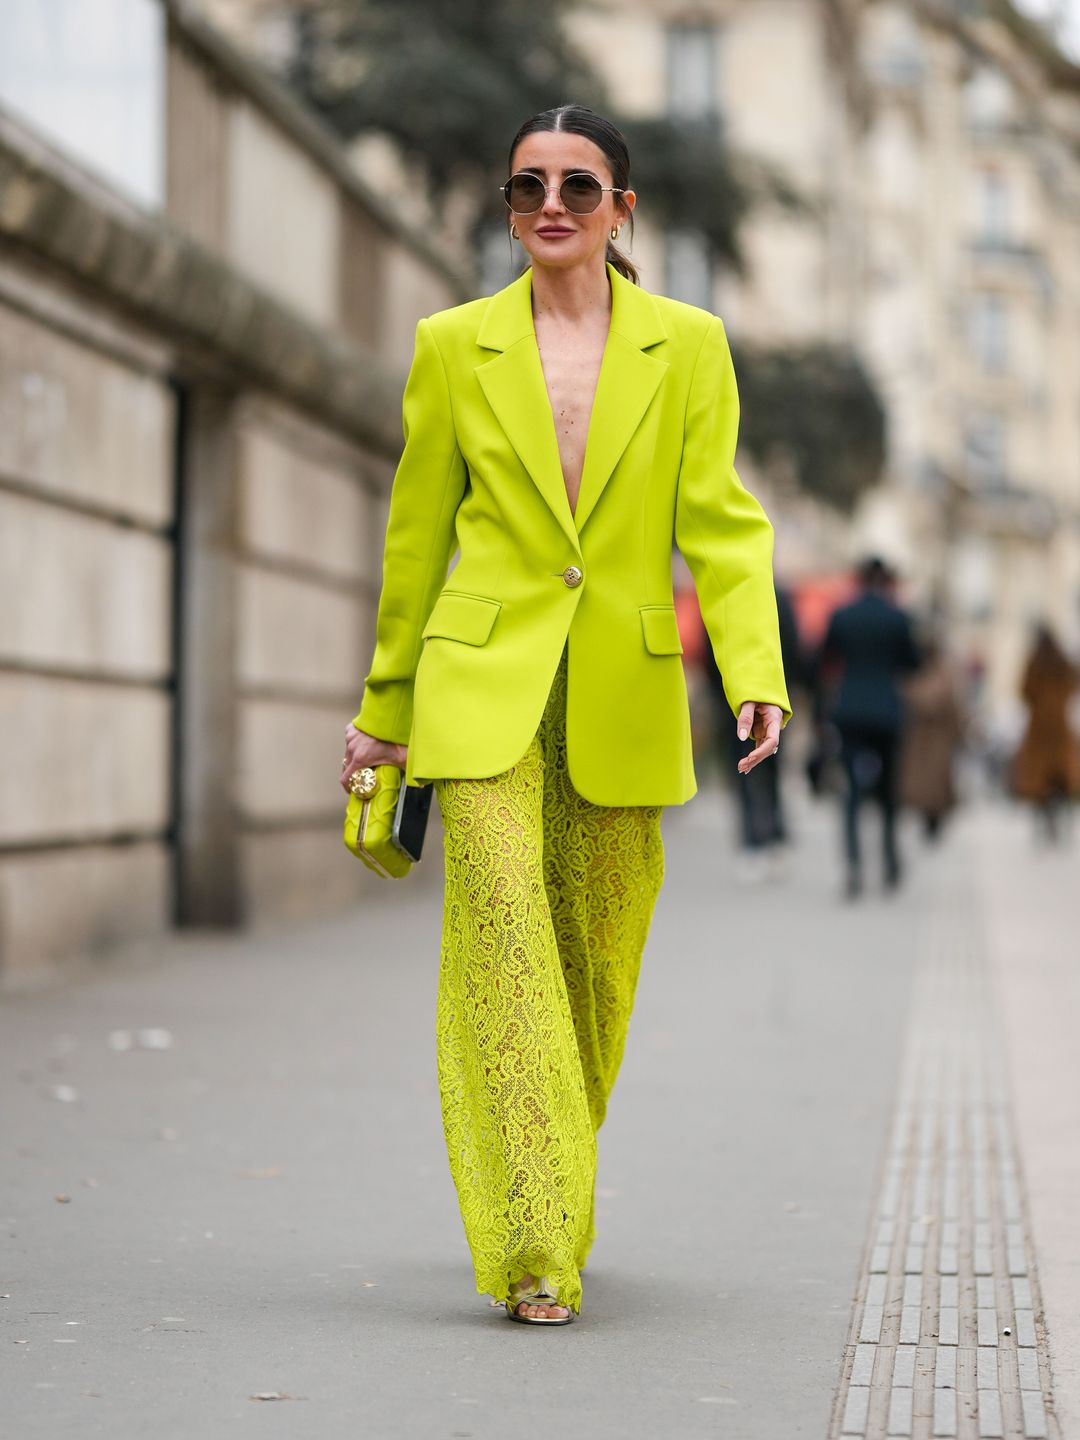 Power dressing: 7 easy ways to nail the trend - from sharp blazers to  shoulder pads